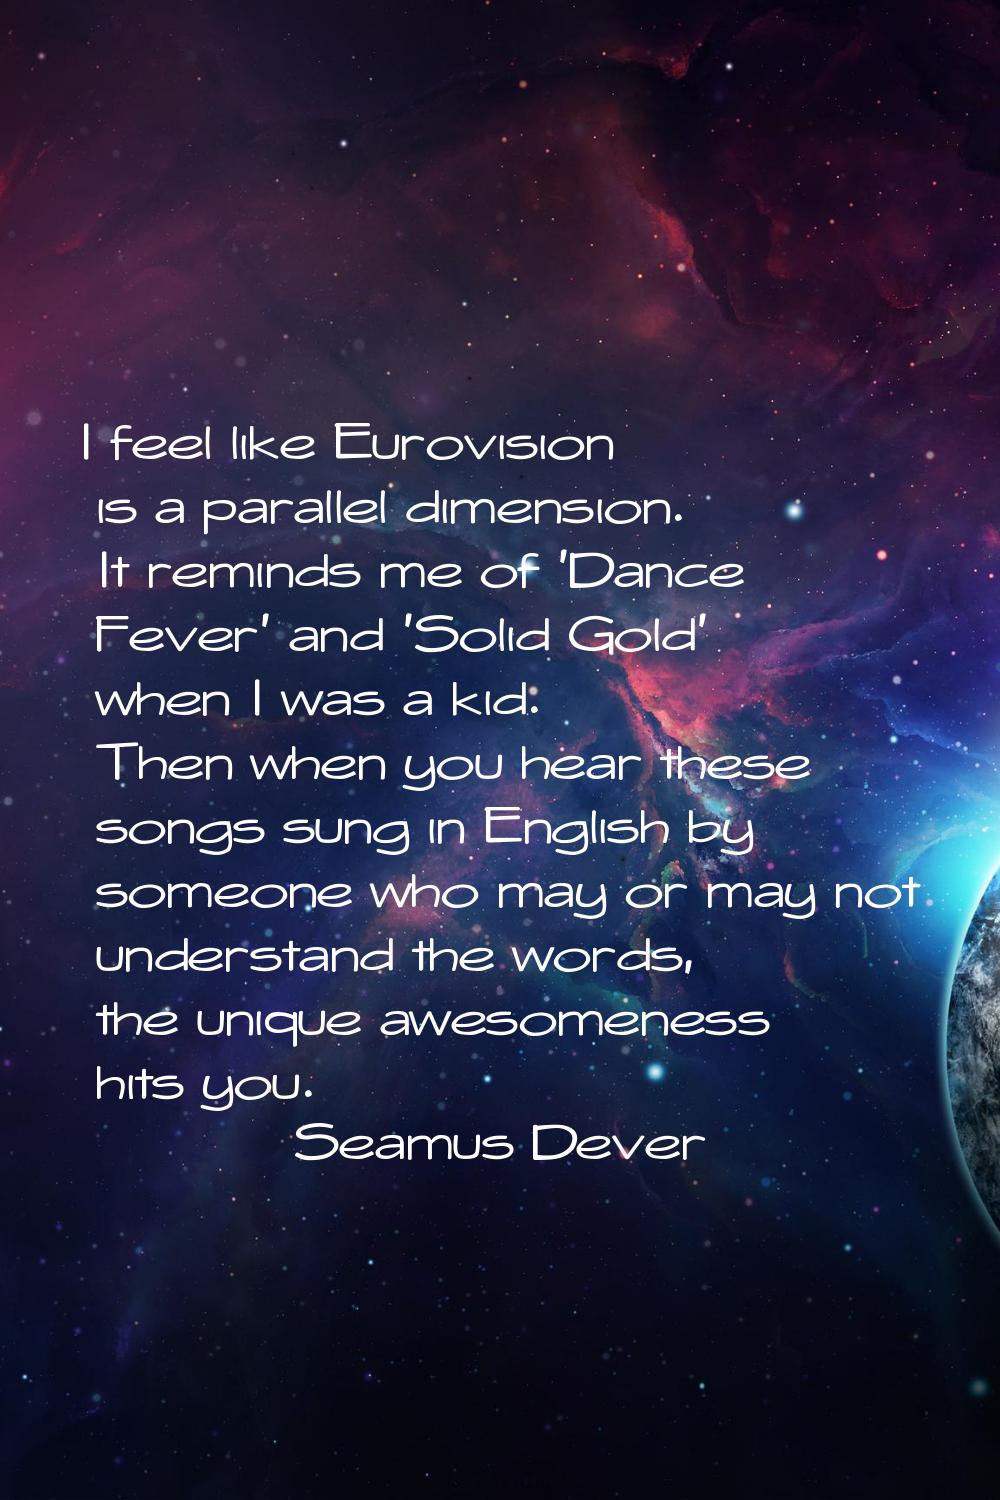 I feel like Eurovision is a parallel dimension. It reminds me of 'Dance Fever' and 'Solid Gold' whe